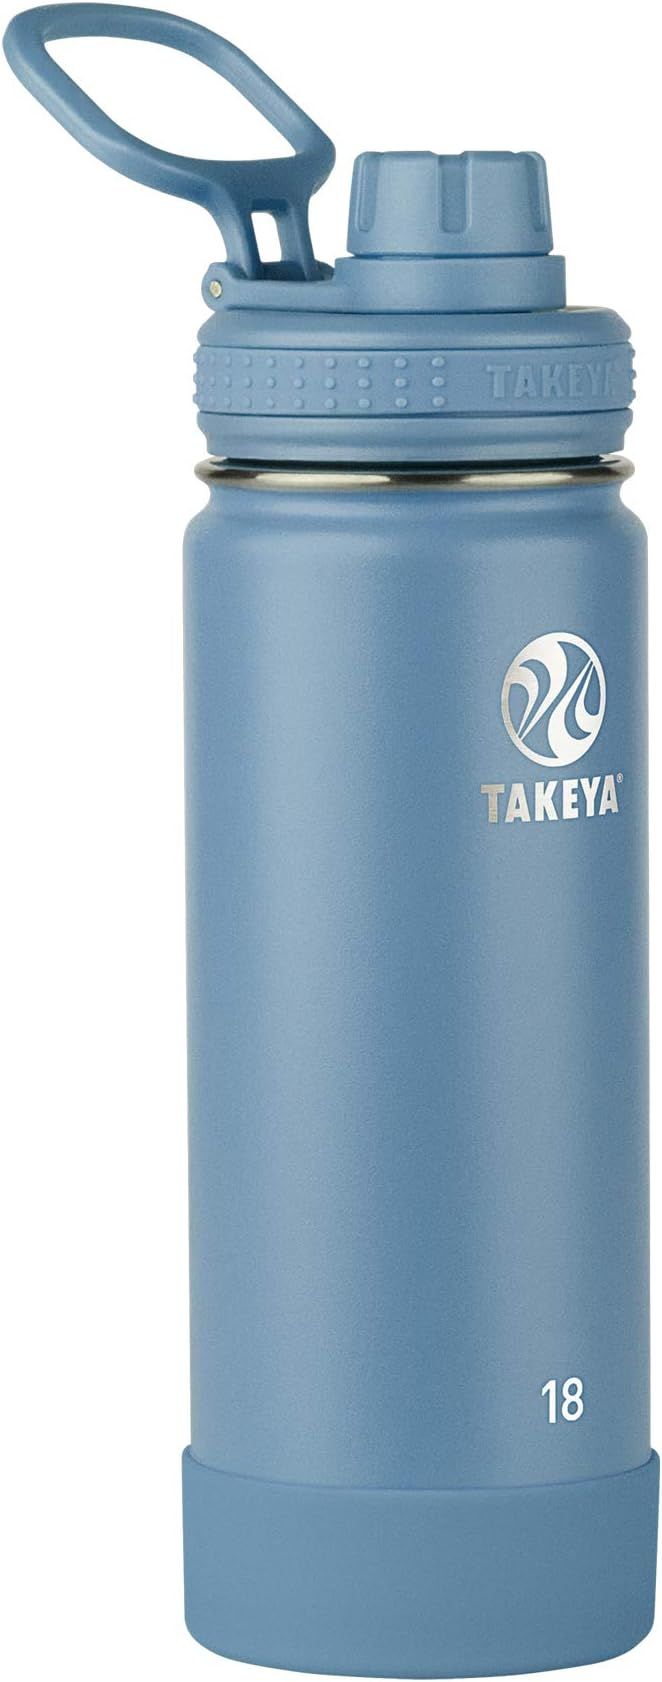 Takeya Actives Insulated Water Bottle with Spout Lid, 18 Ounce, Bluestone | Amazon (US)